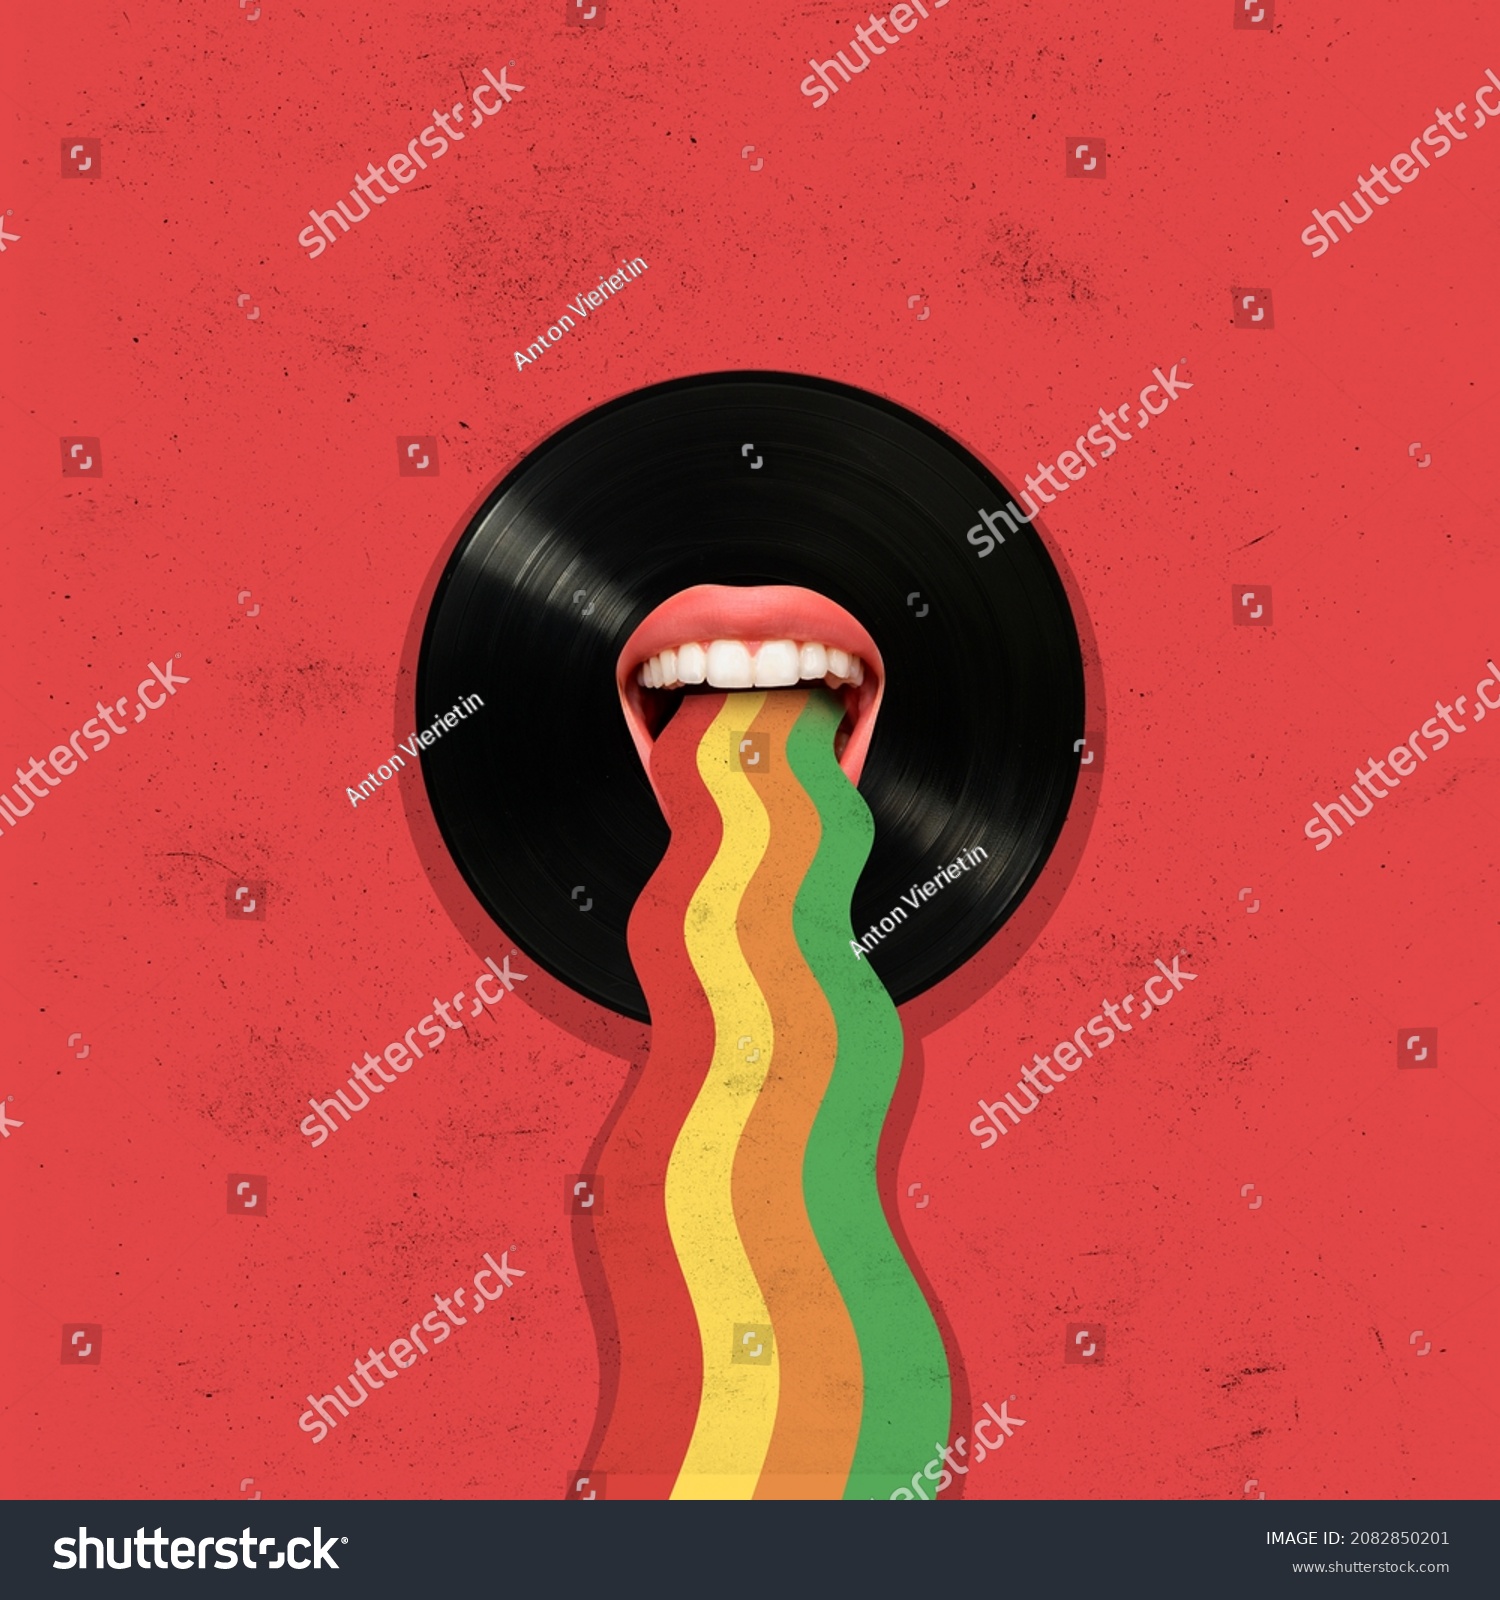 Retro style. Contemporary art collage of vinyl record with female mouth and rainbow path isolated over red background. Concept of art, music, fashion, party, creativity. Copy space for ad #2082850201